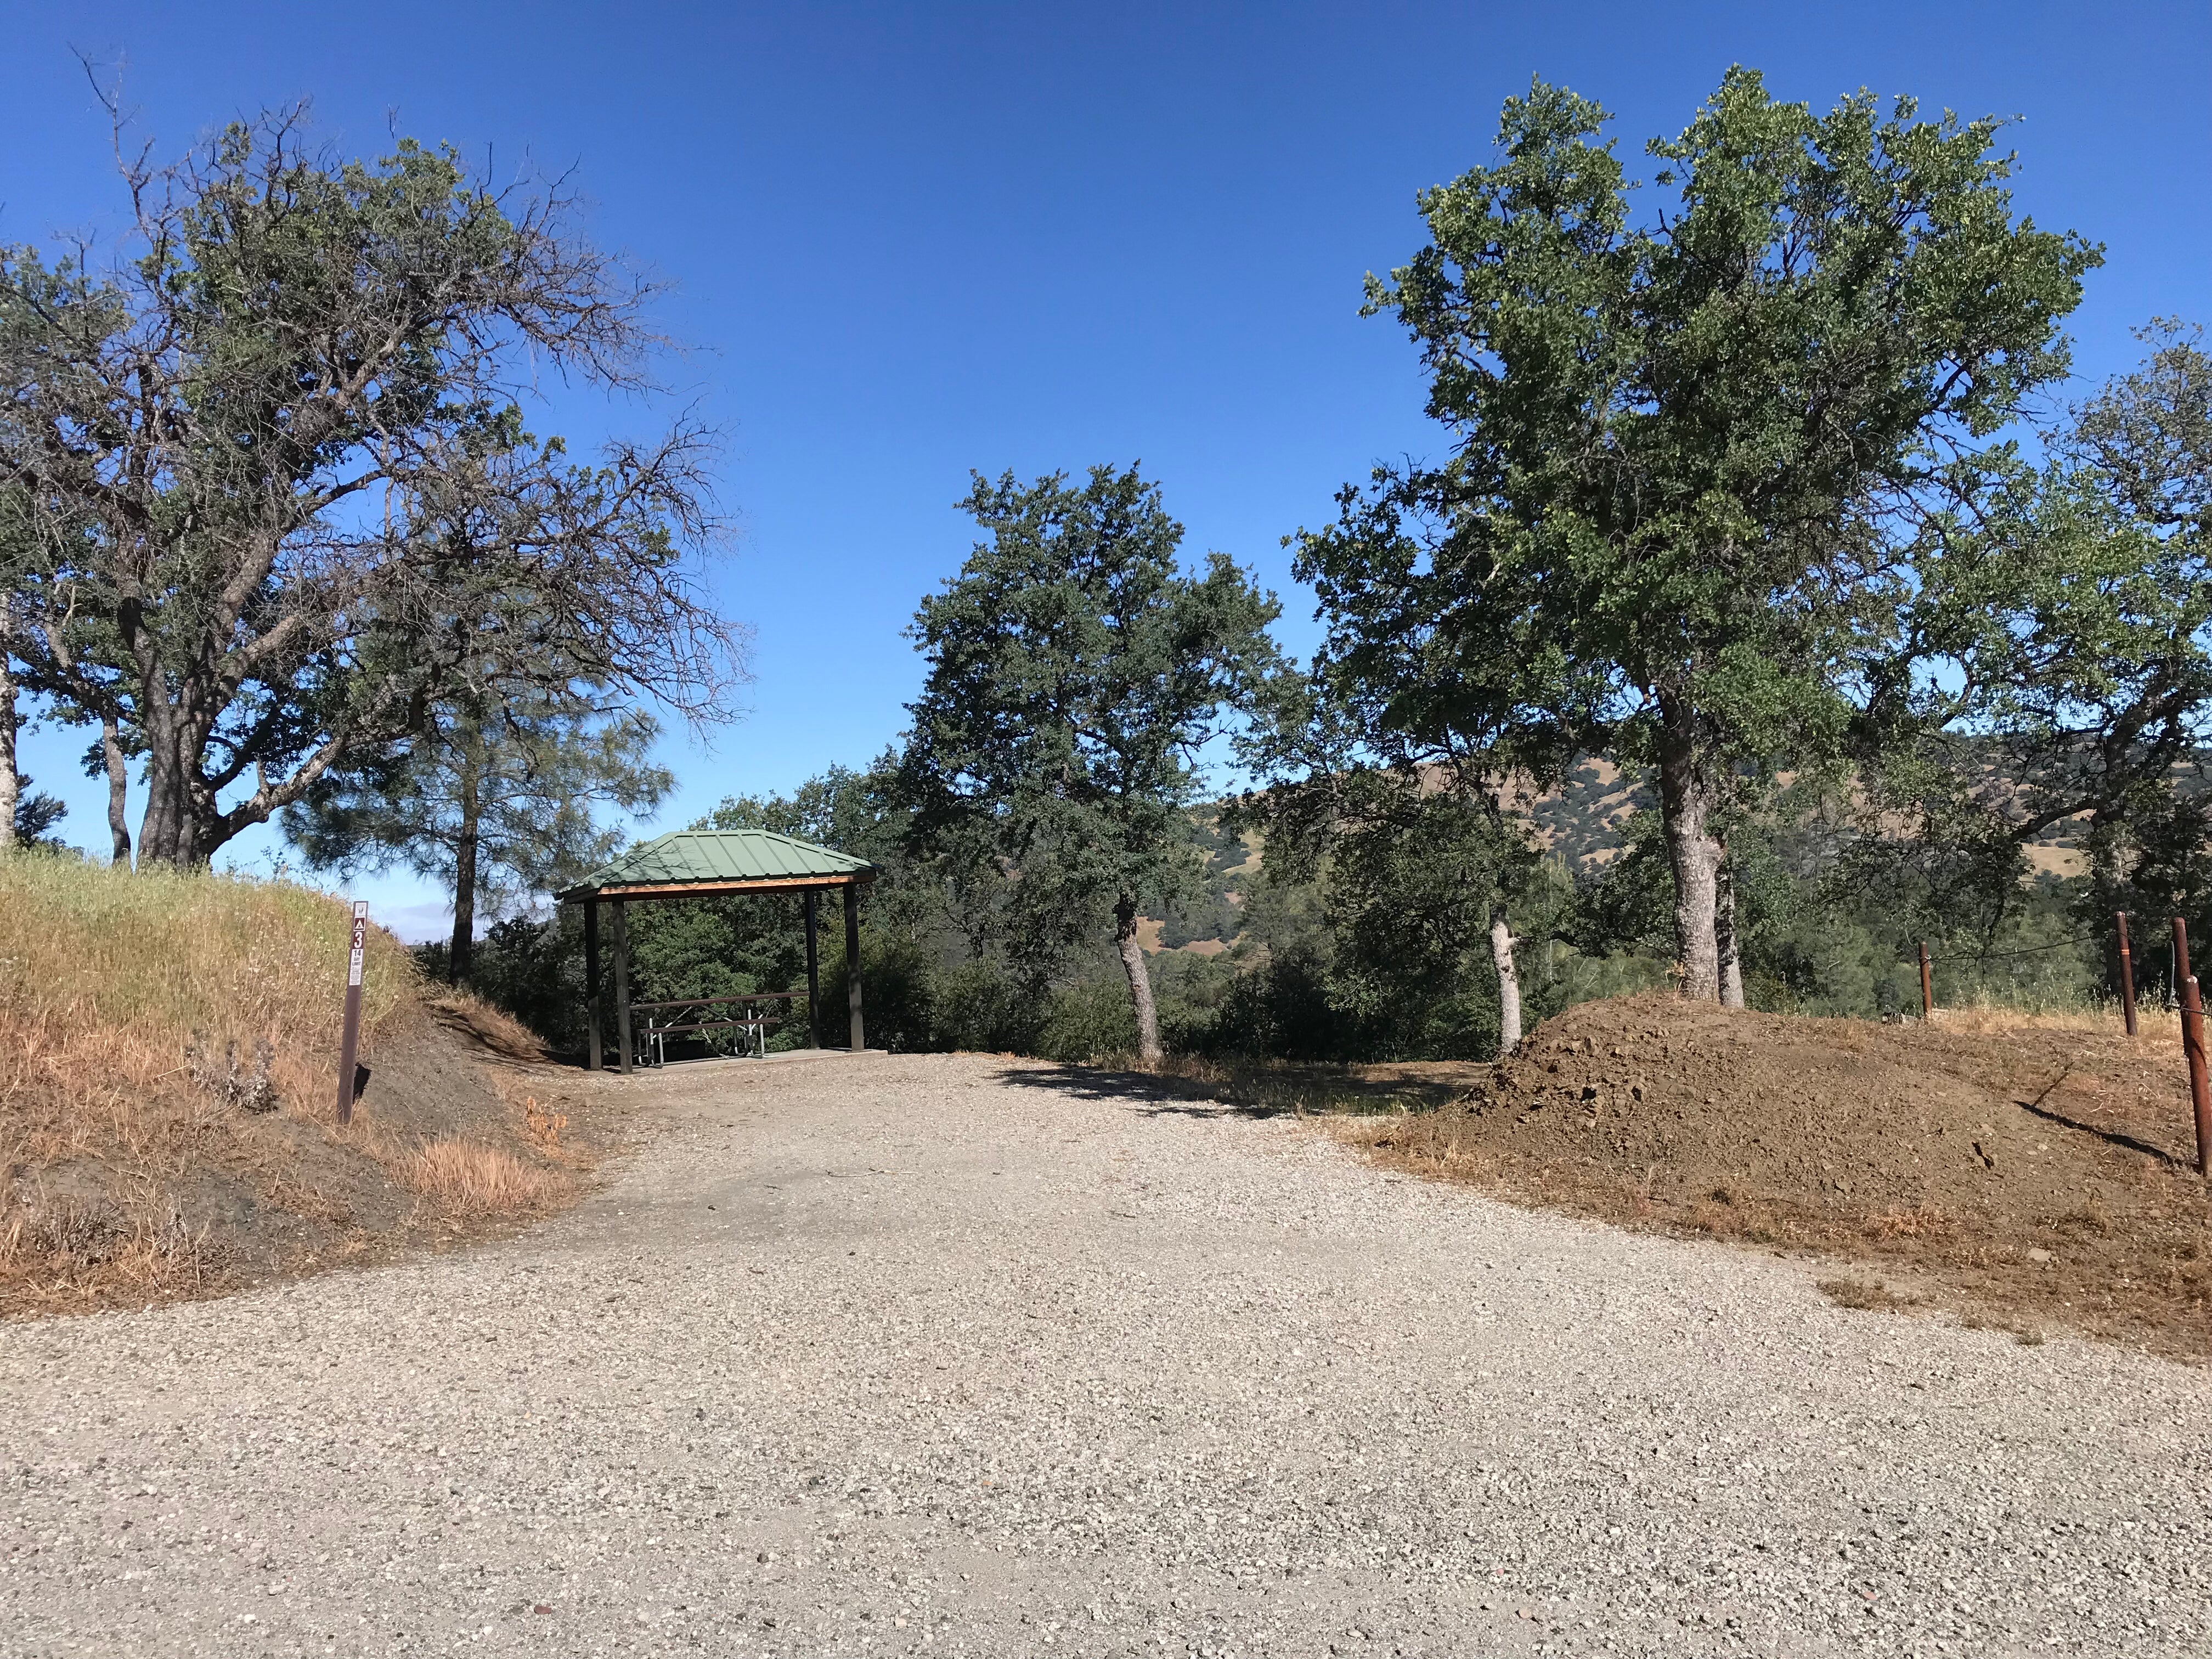 Camper submitted image from Laguna Mountain Campground - 5